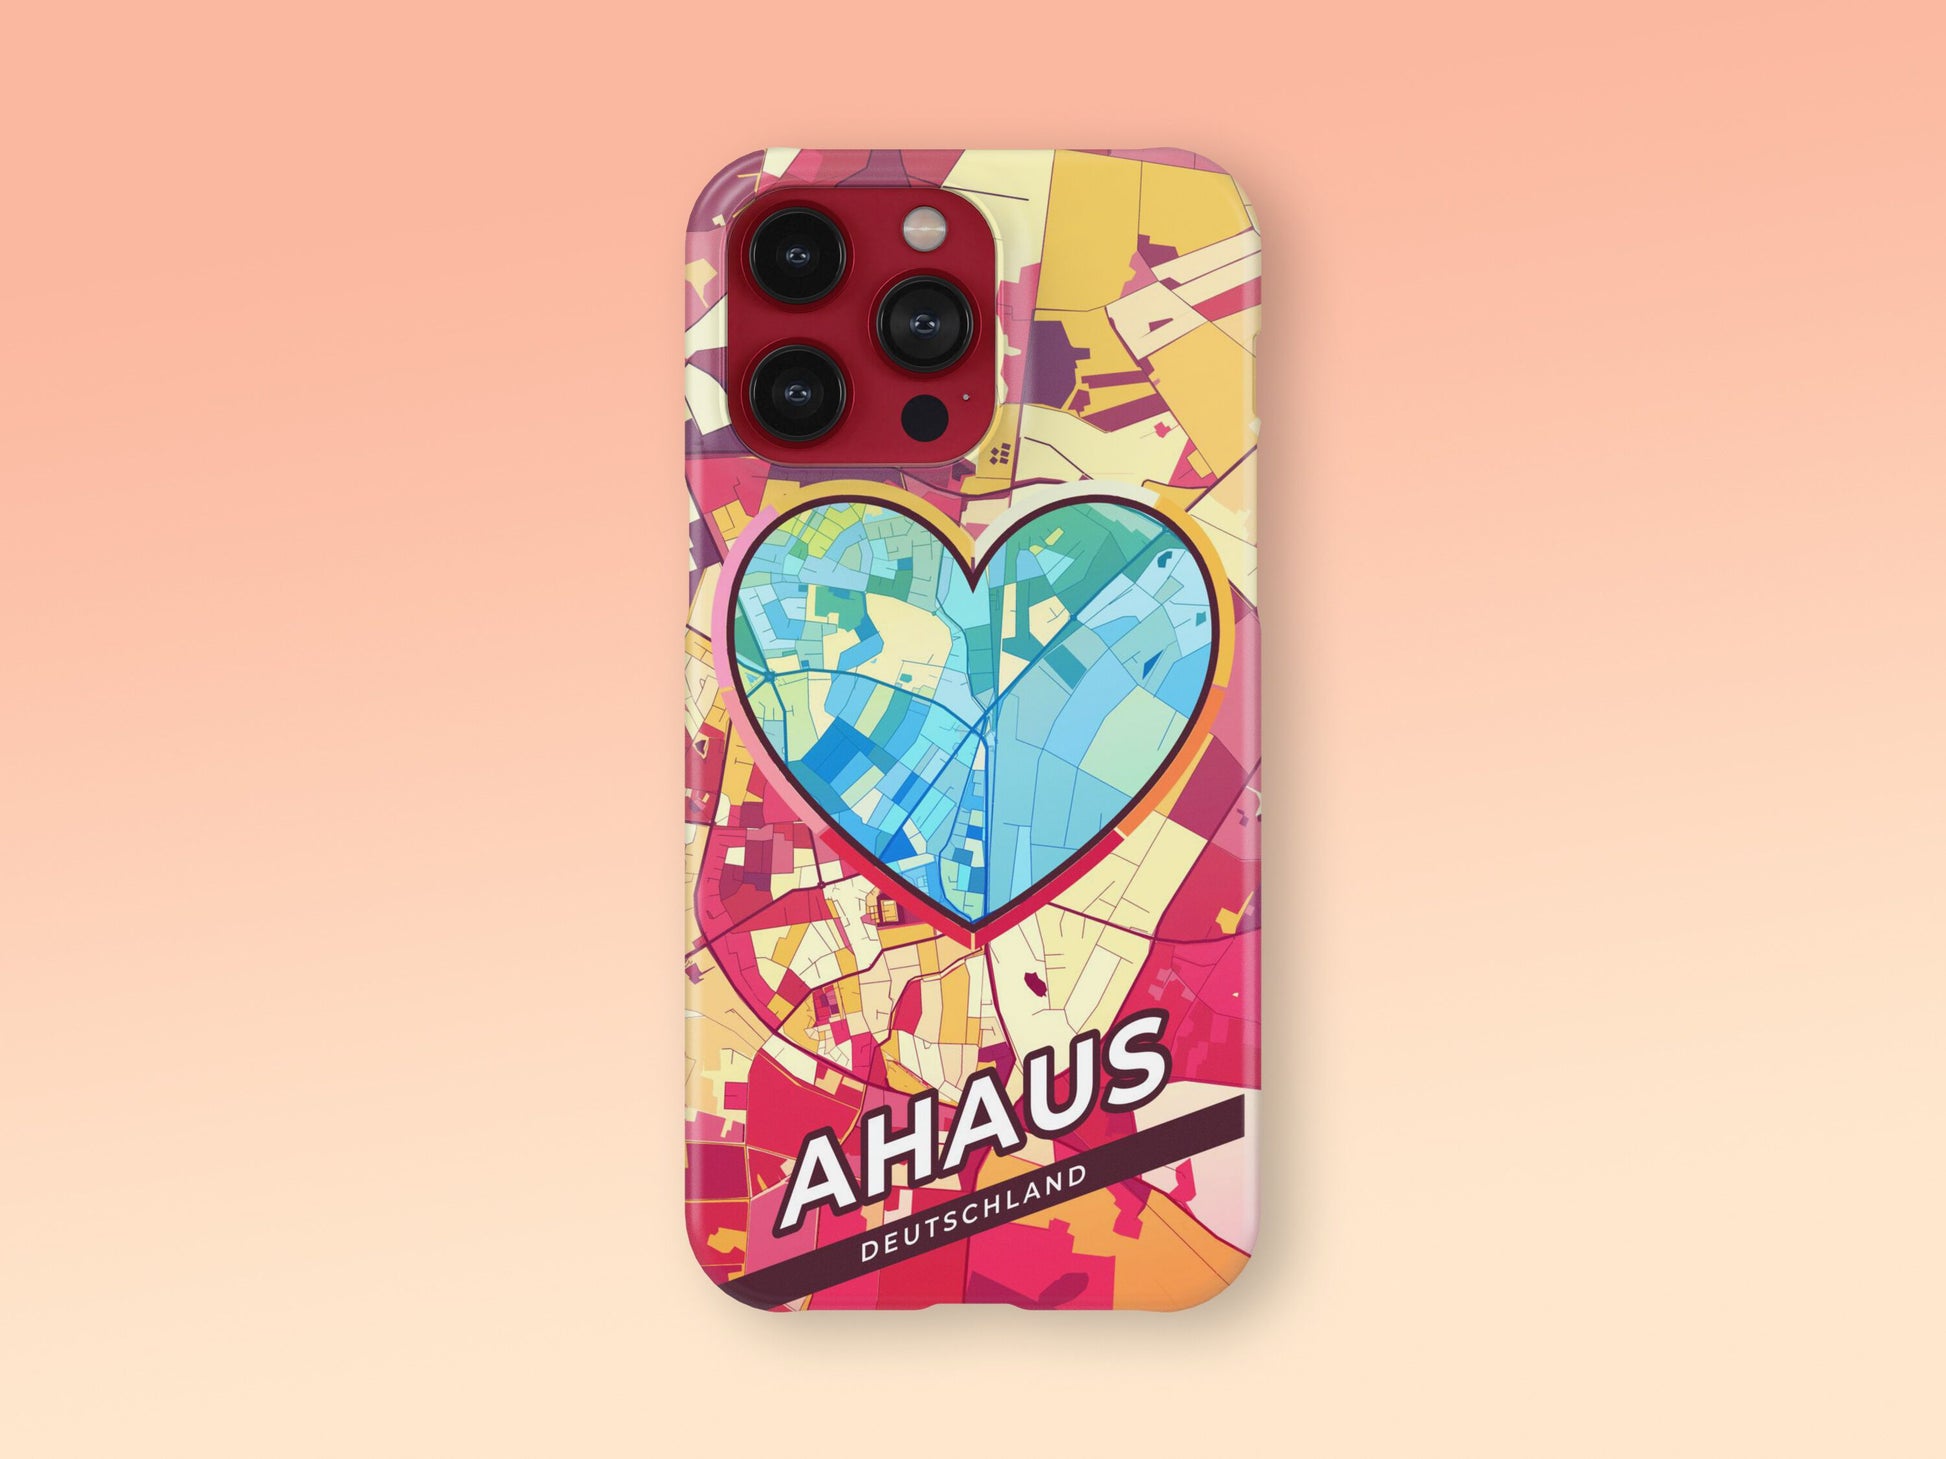 Ahaus Deutschland slim phone case with colorful icon. Birthday, wedding or housewarming gift. Couple match cases. 2